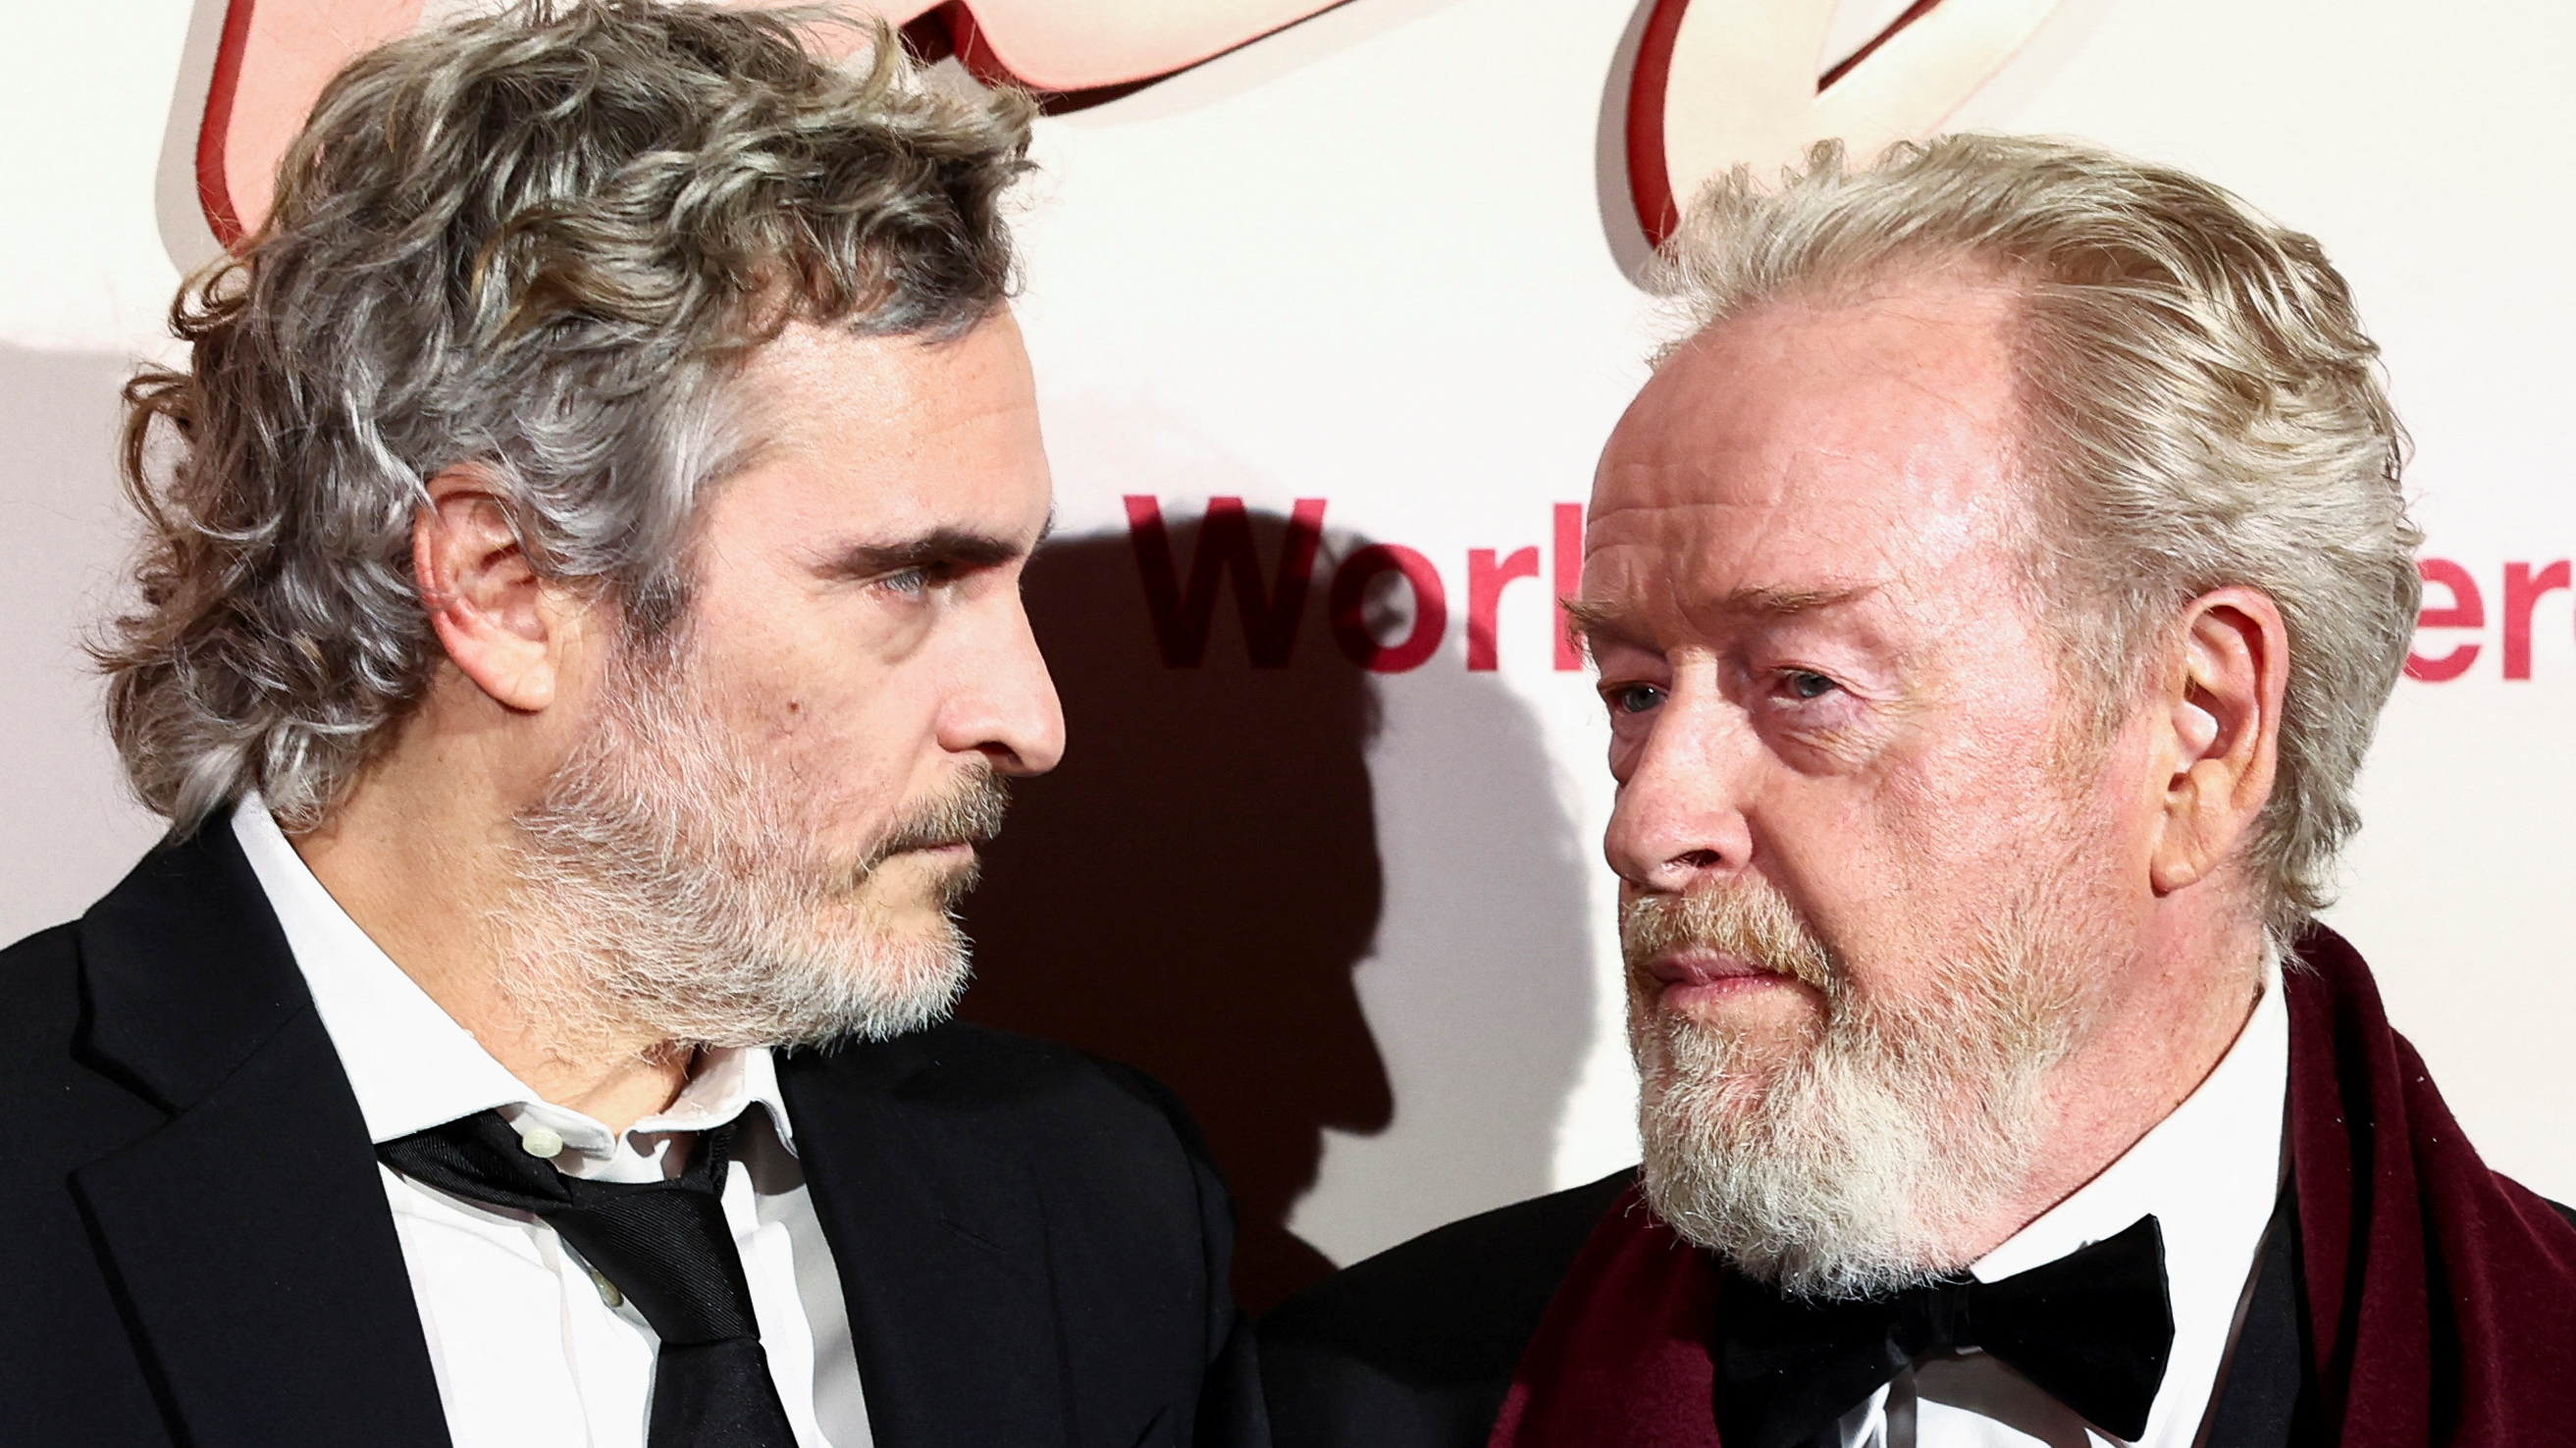 The film's star Joaquin Phoenix and director Ridley Scott. Their new Napoleon film has had mixed reviews. /Stephanie Lecocq/Reuters